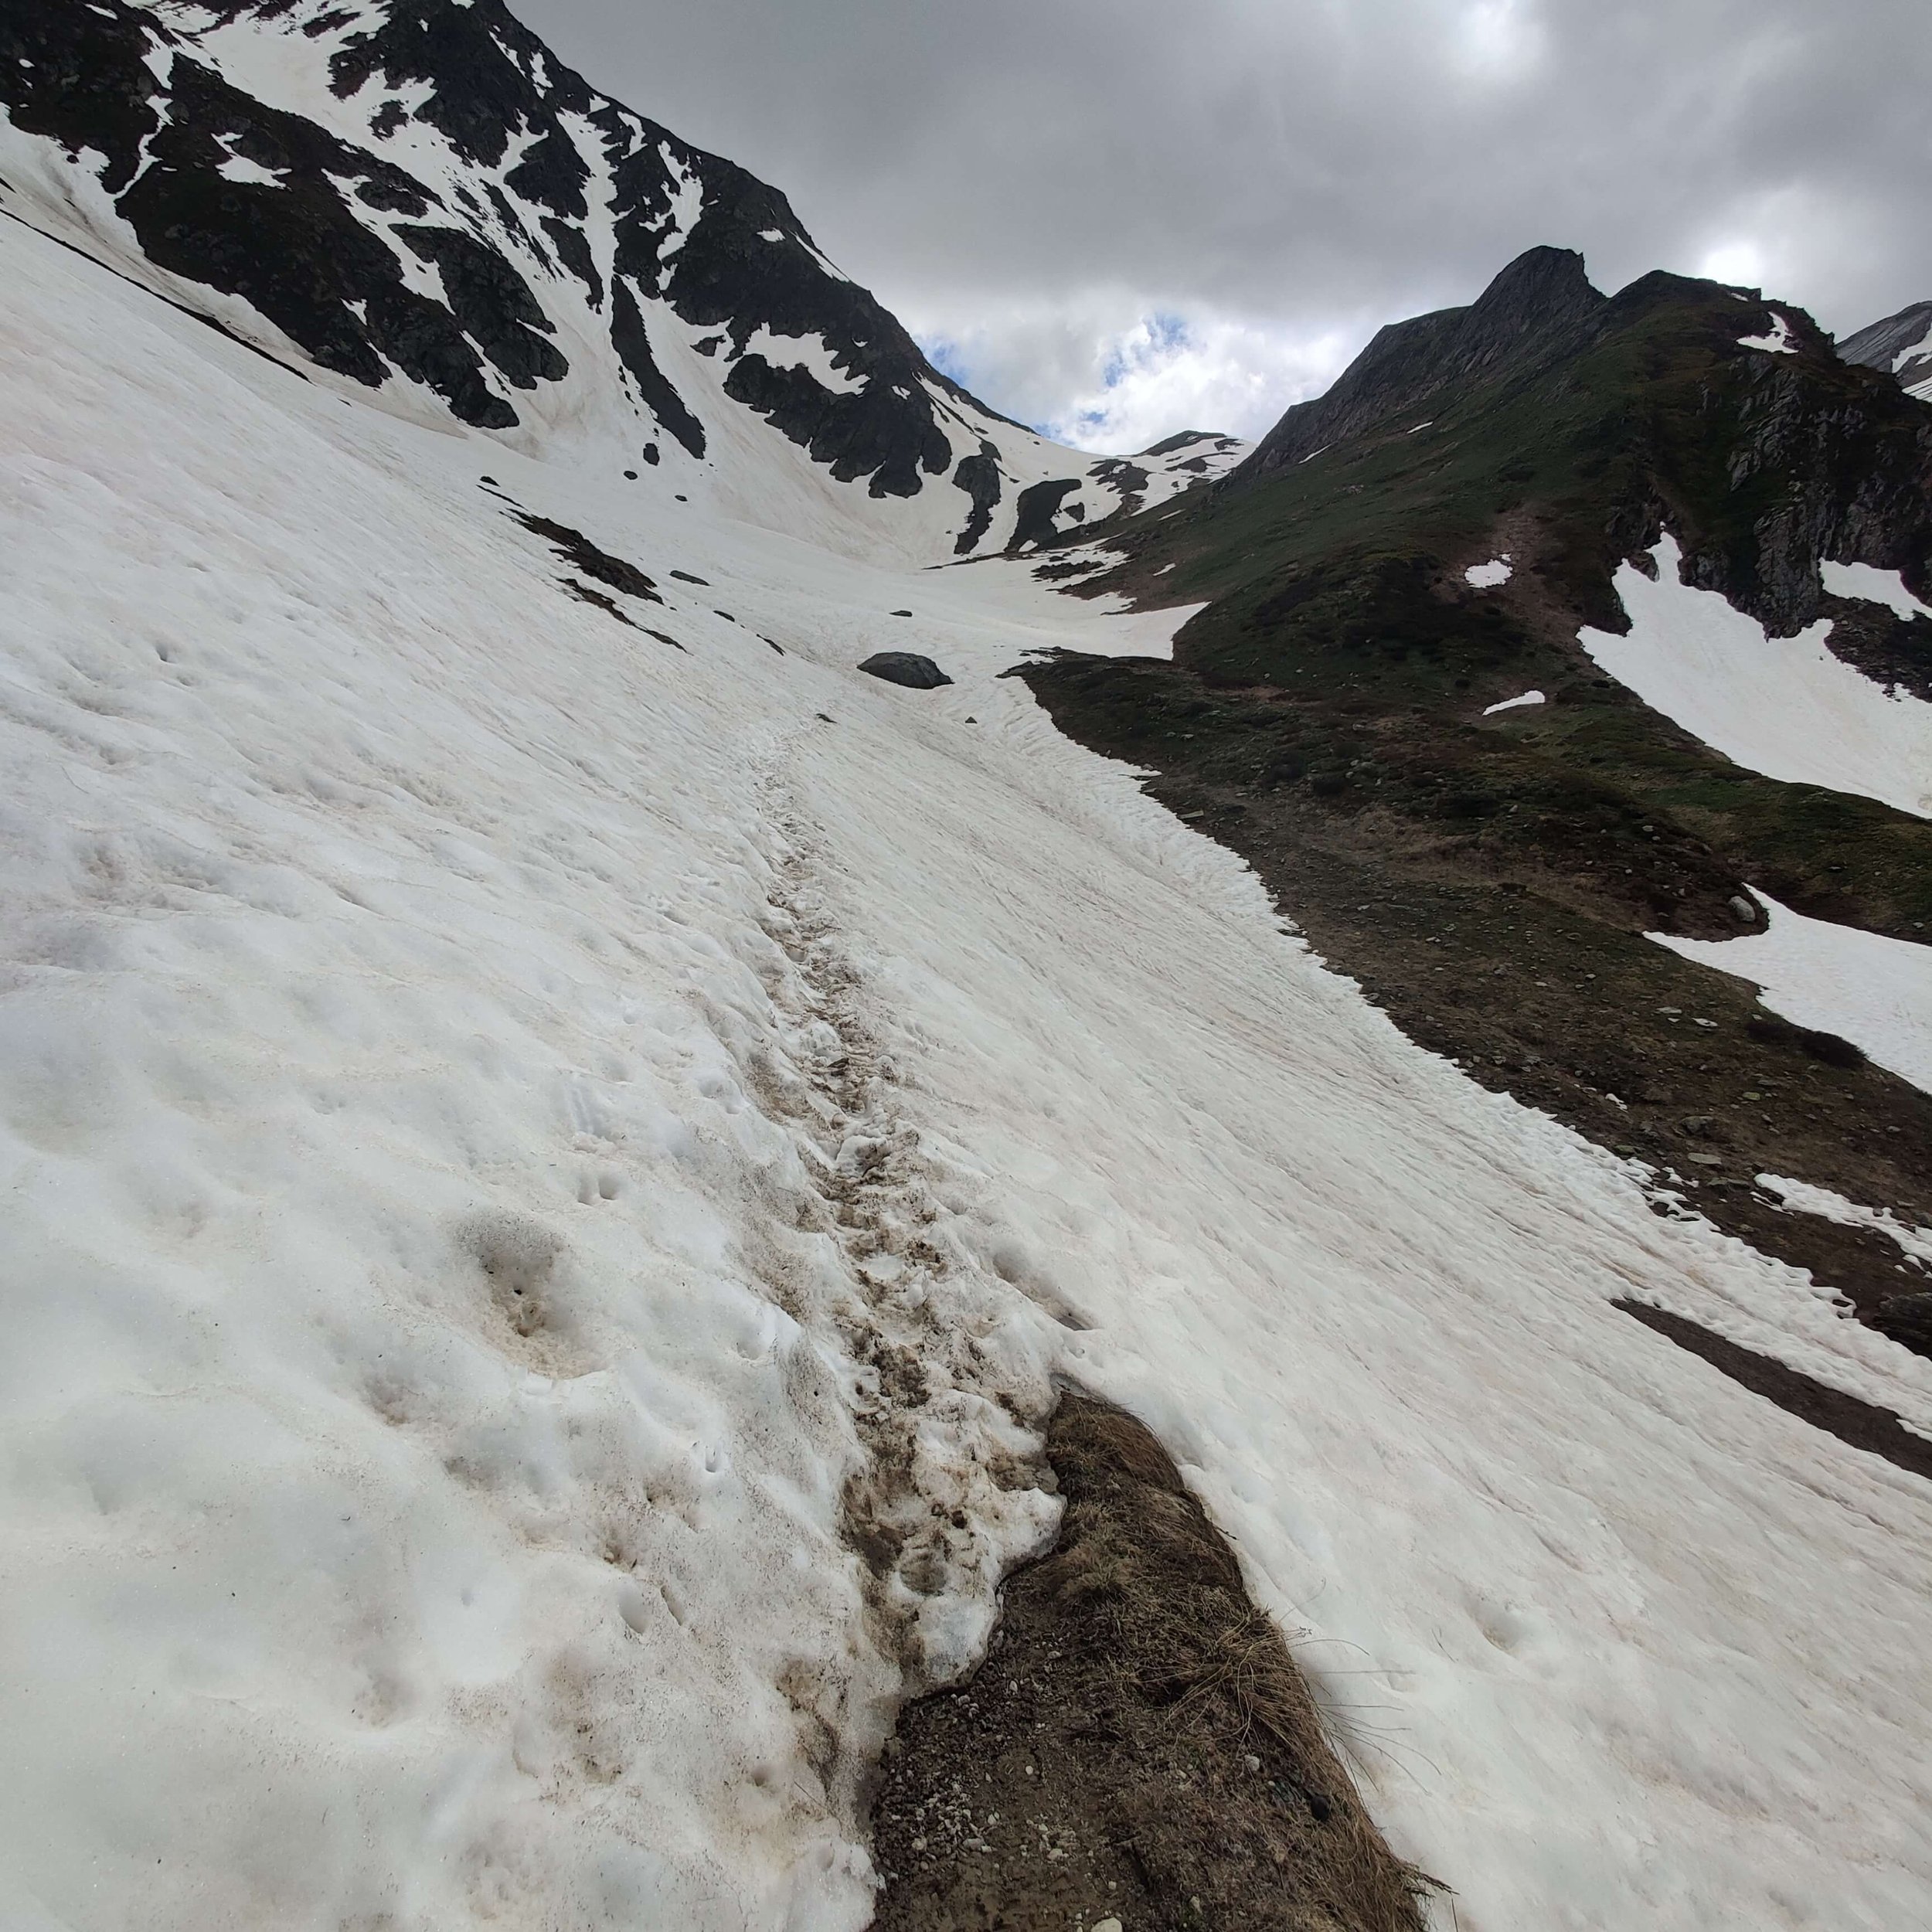 Snow line at 2,090m on Les Contaminies side of Col du Bonhomme_29 May 2022_resized.jpg